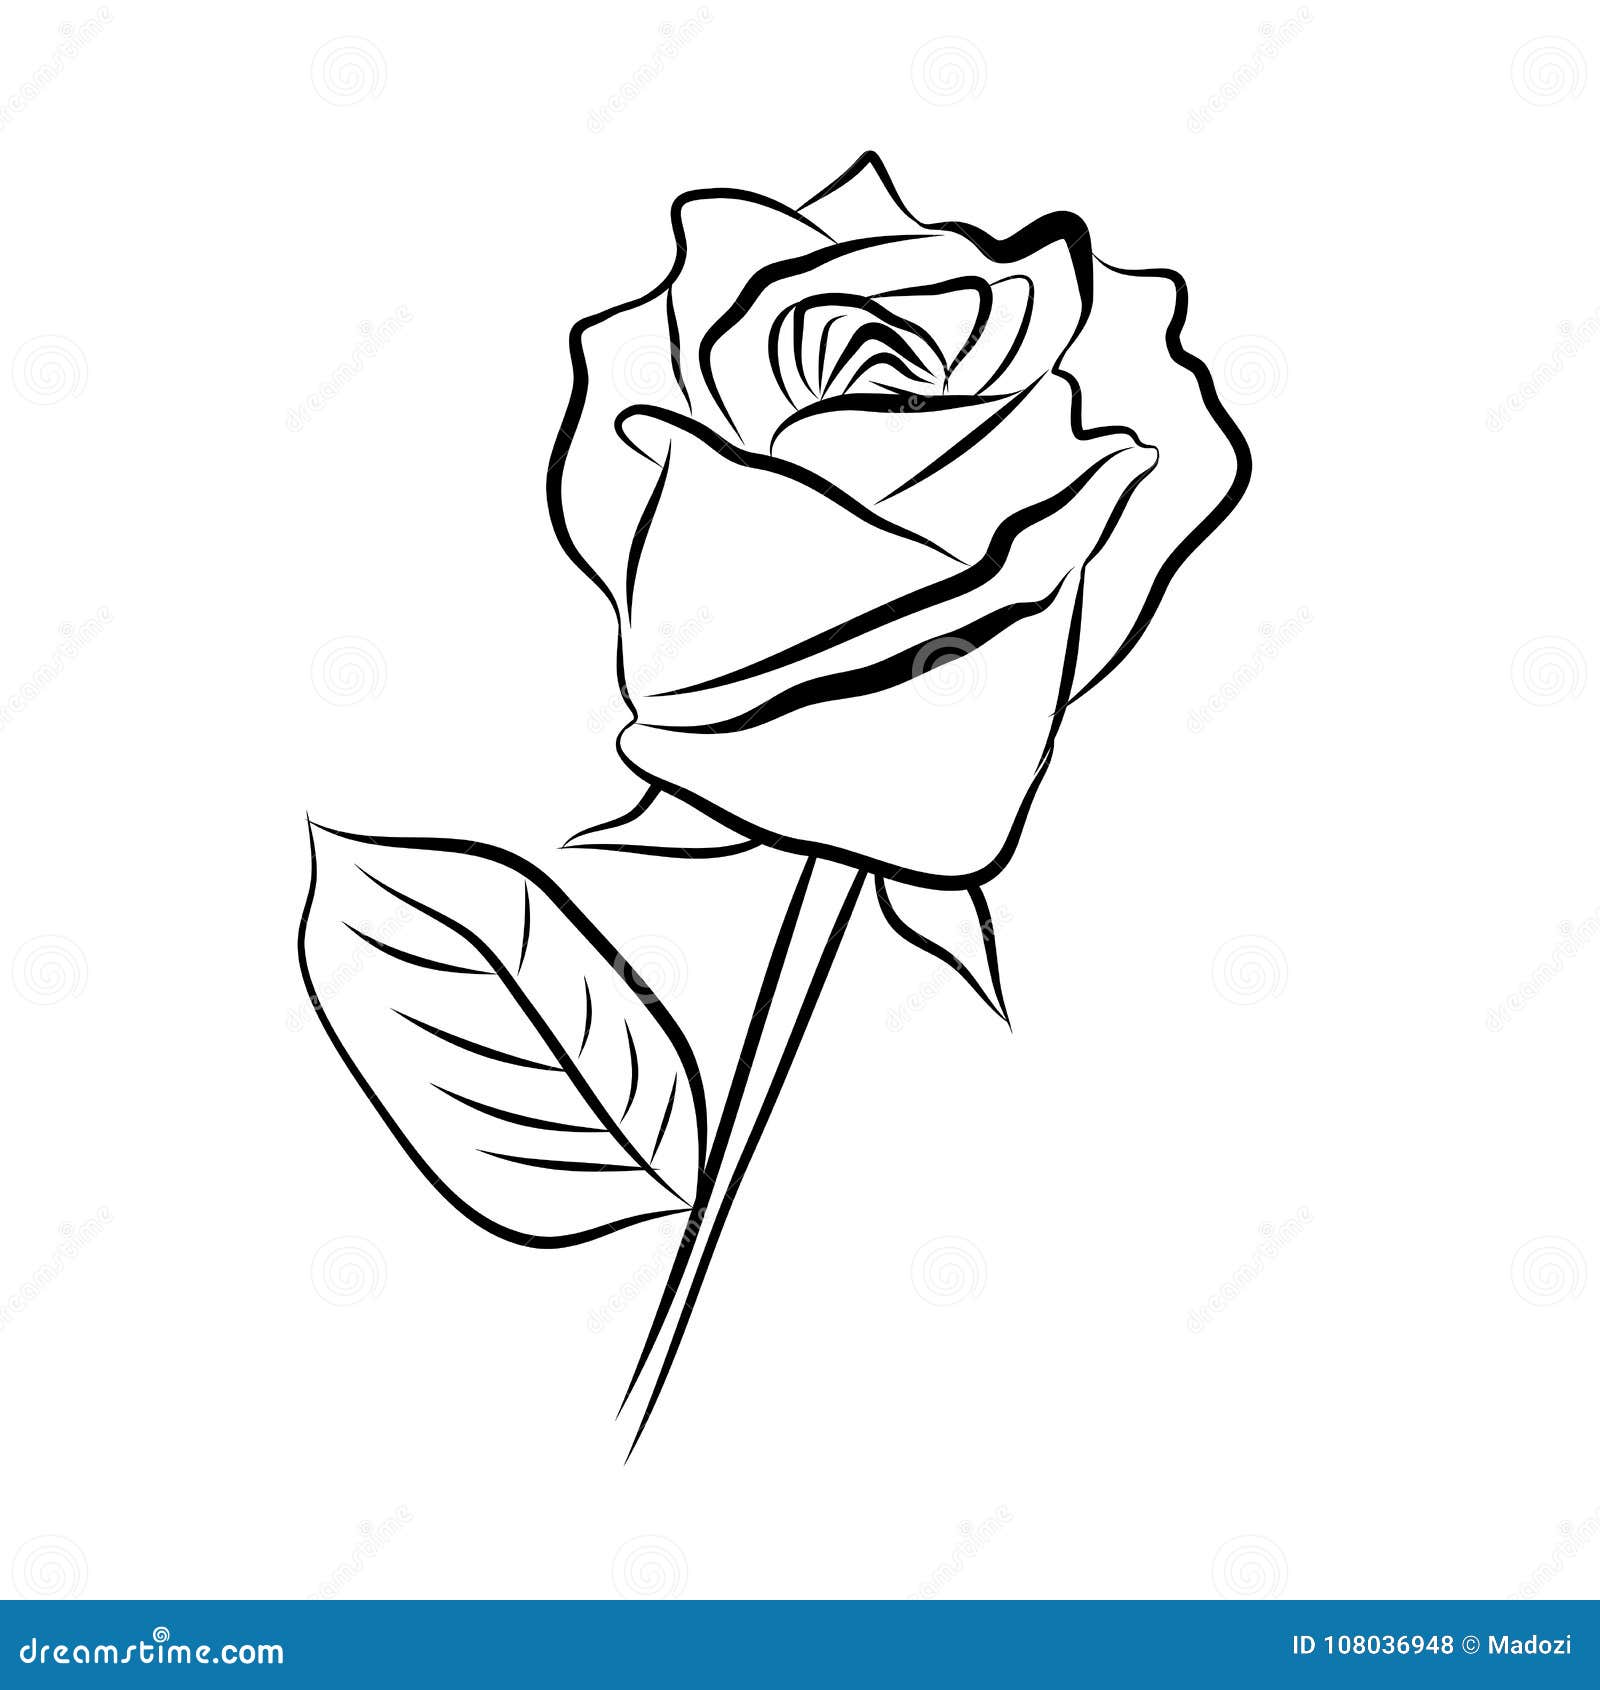 Sketch Line Drawing Of Rose Stock Vector Illustration Of Doodle